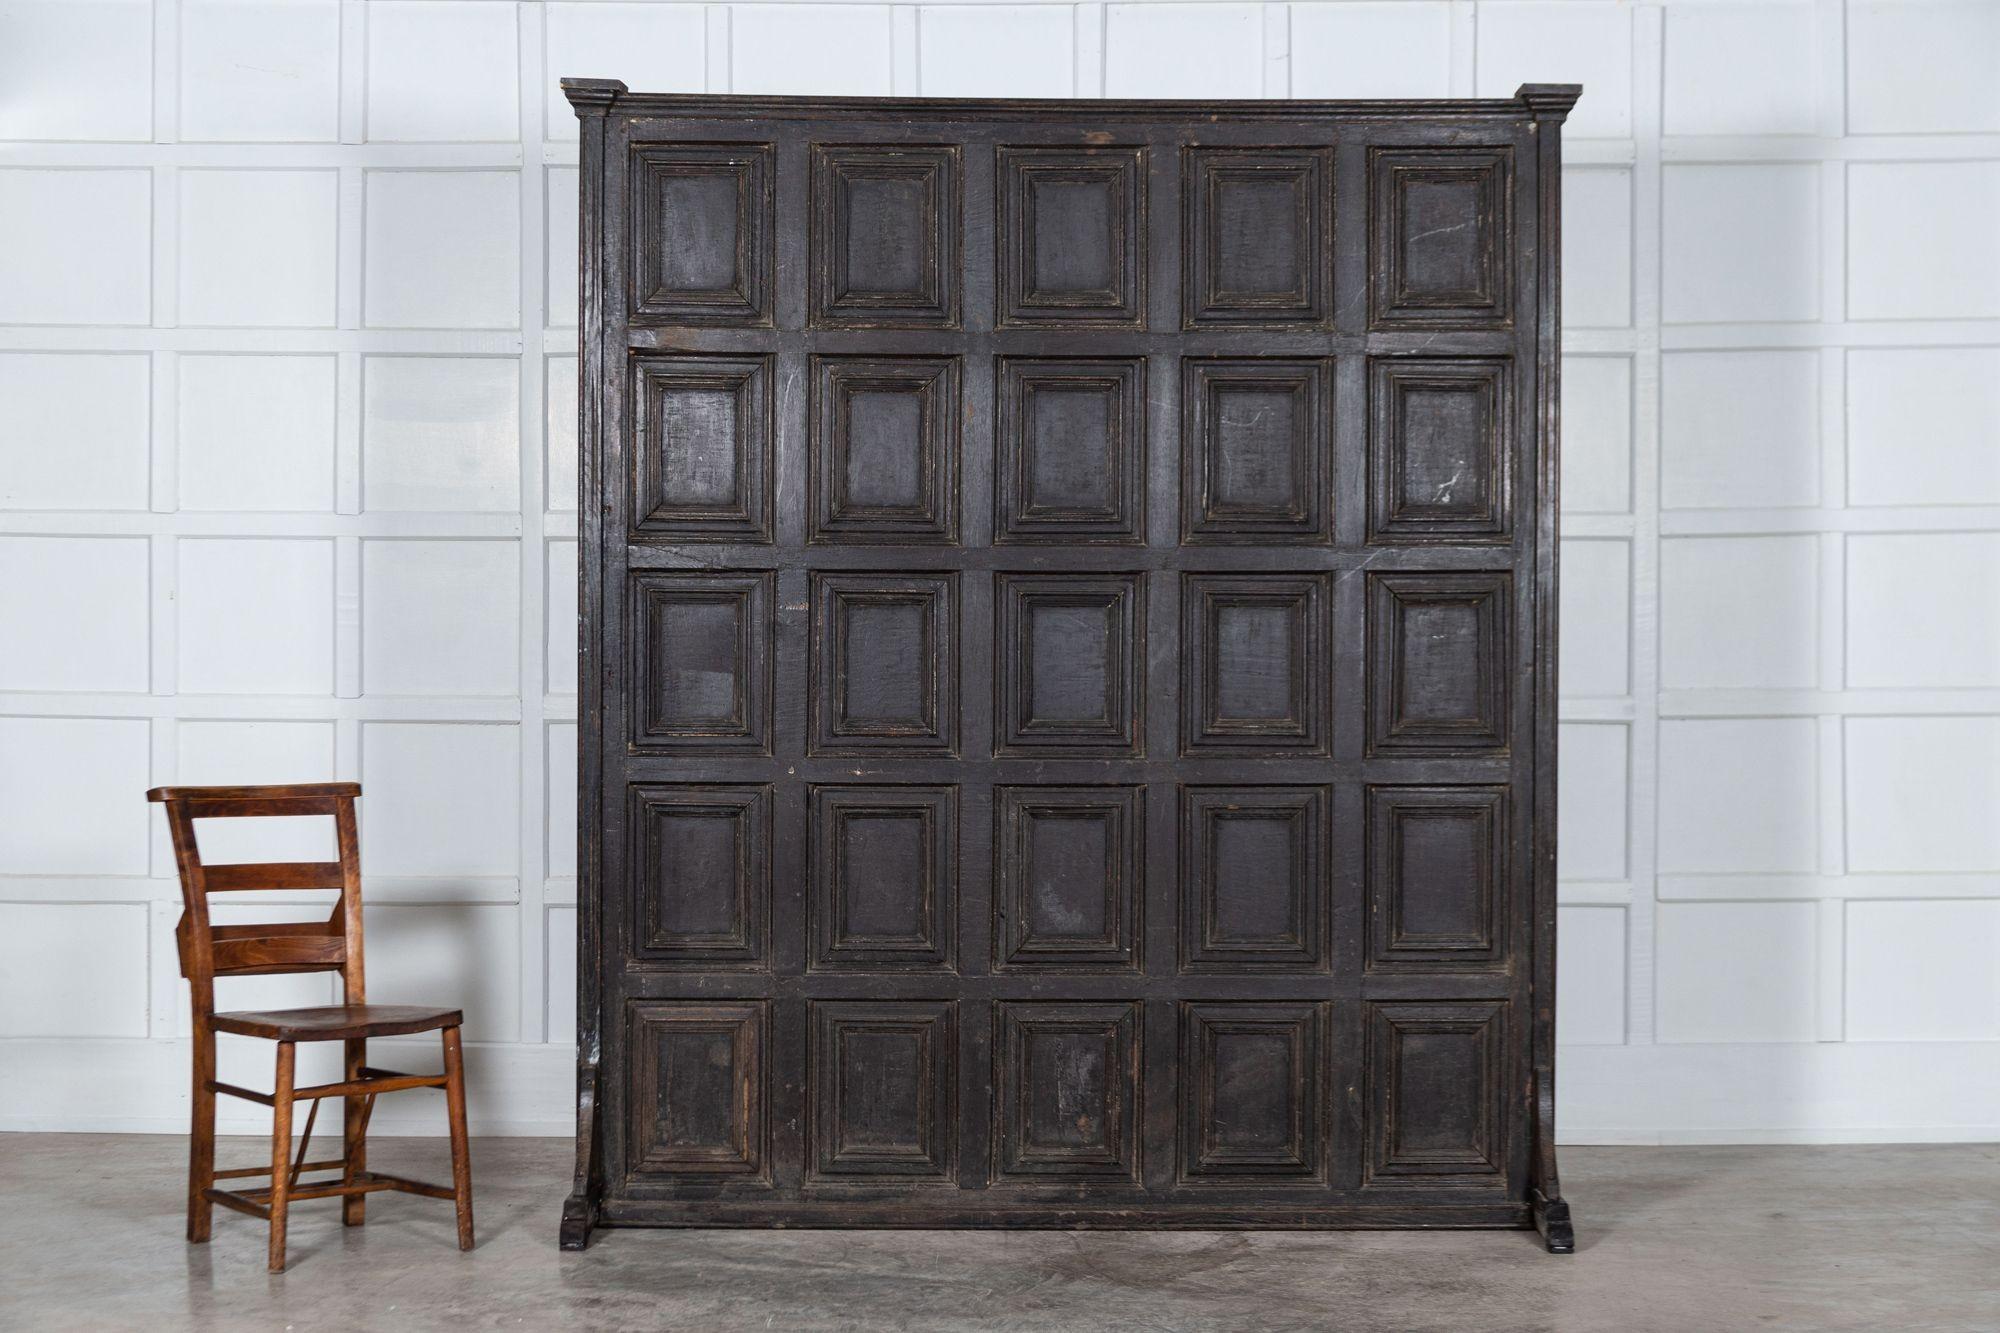 circa 1900
Large English Oak panelled room divider

We can also customise existing pieces to suit your scheme/requirements. We have our own workshop, restorers and finishers. From adapting to finishing pieces including, stripping, bleaching,